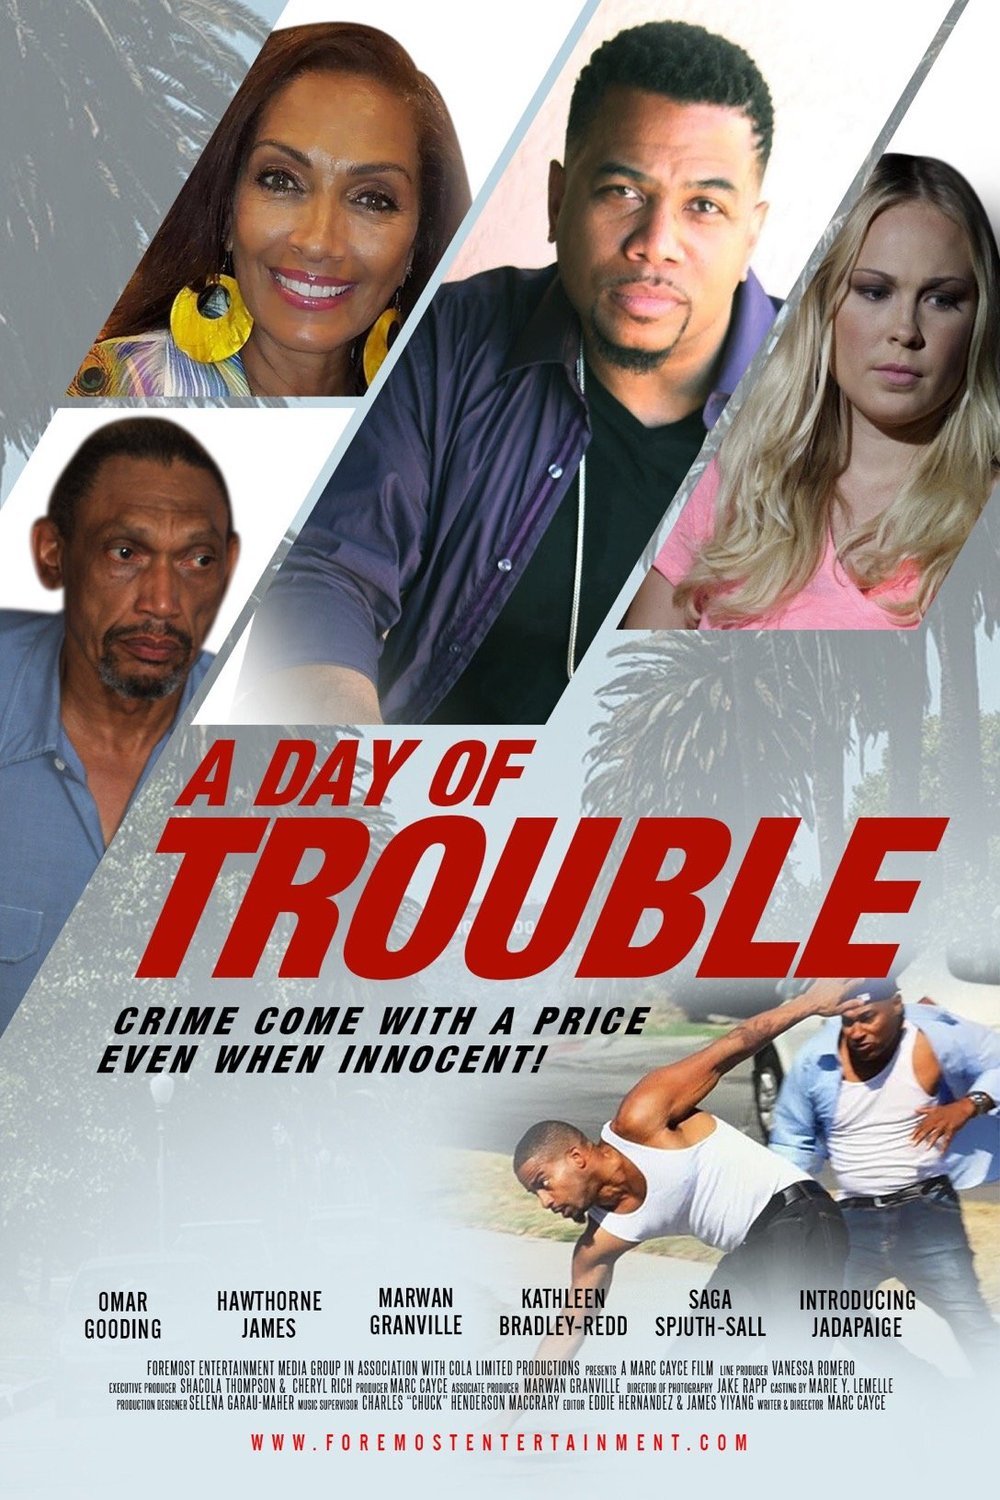 Poster of the movie A Day of Trouble